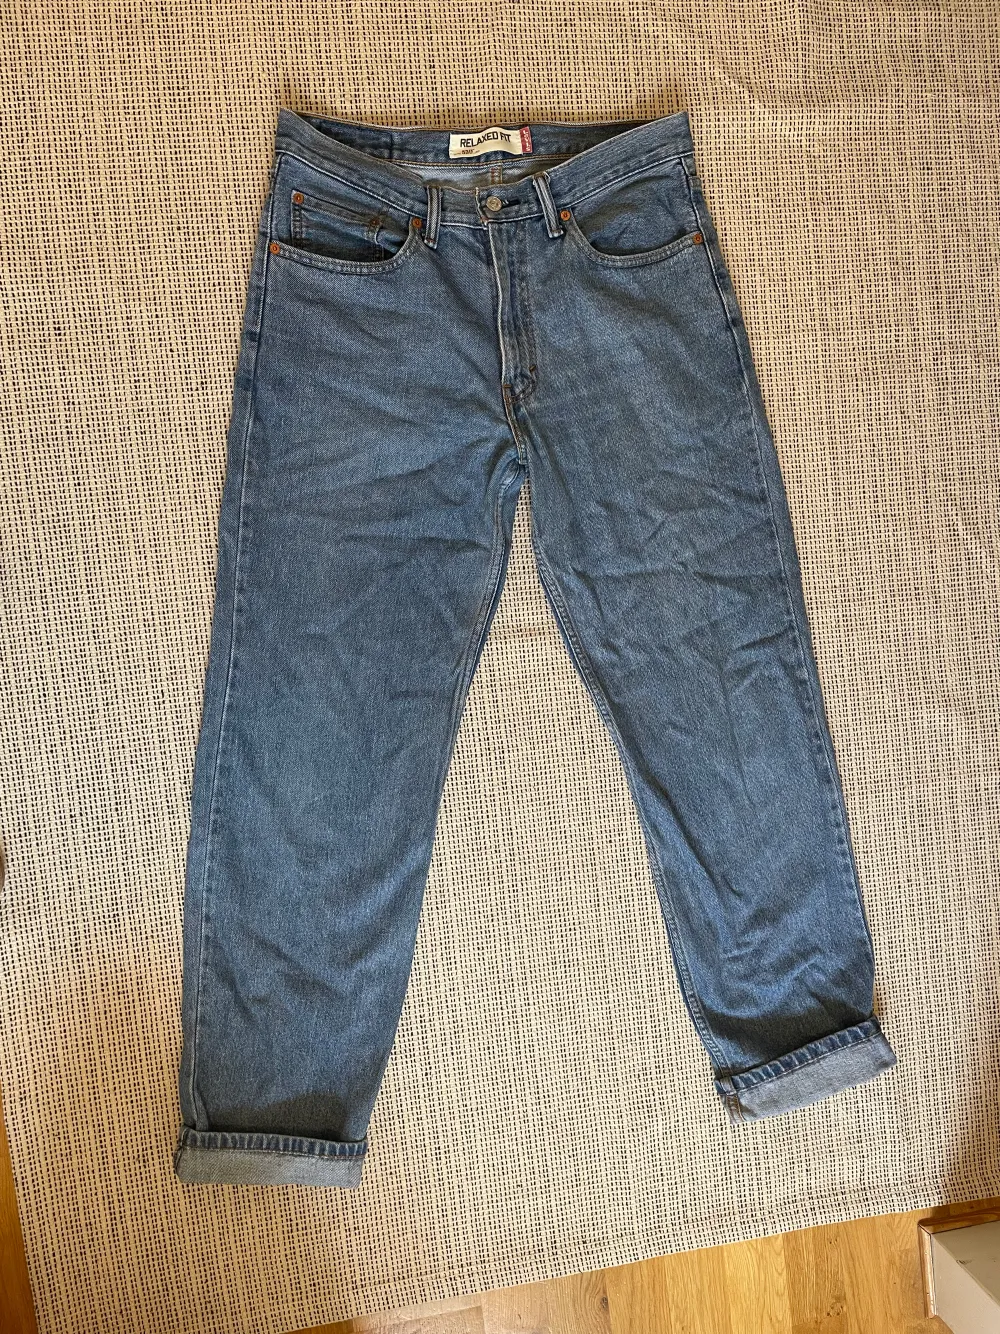 Vintage Levi jeans  Relaxed fit  Model 550 33/36. Jeans & Byxor.